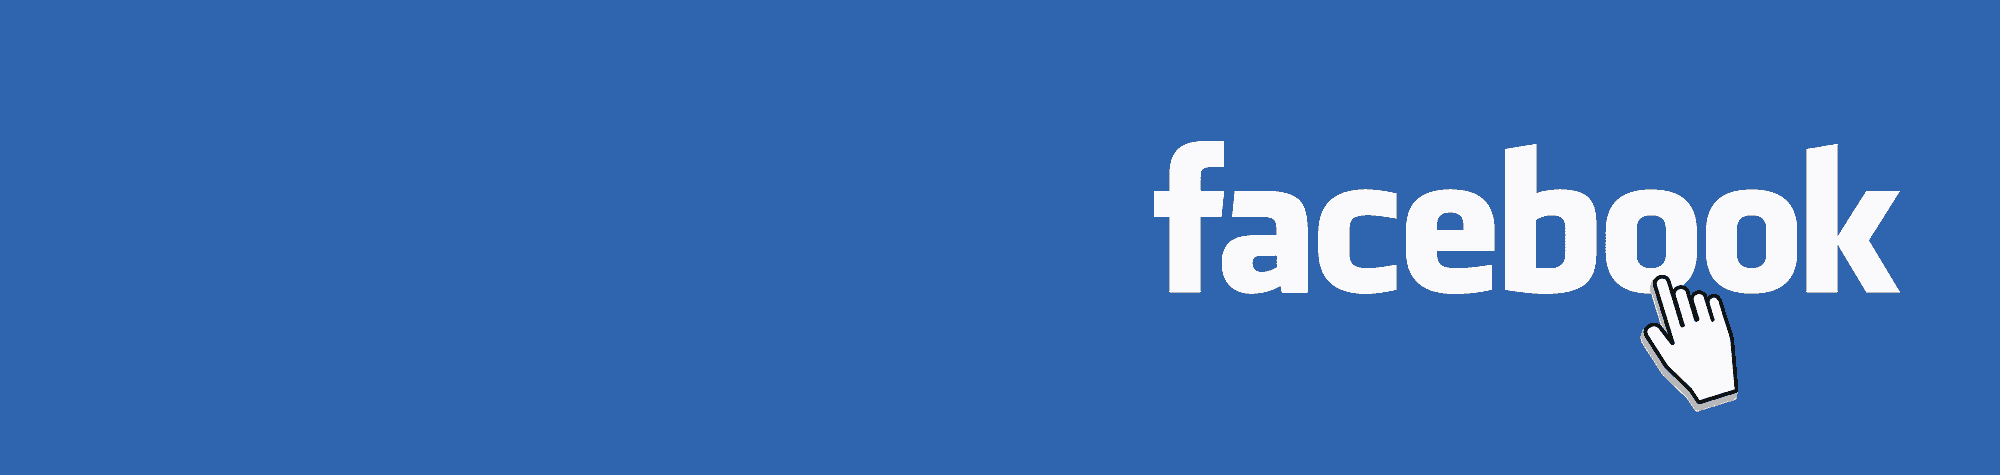 How to create a Facebook page for your business